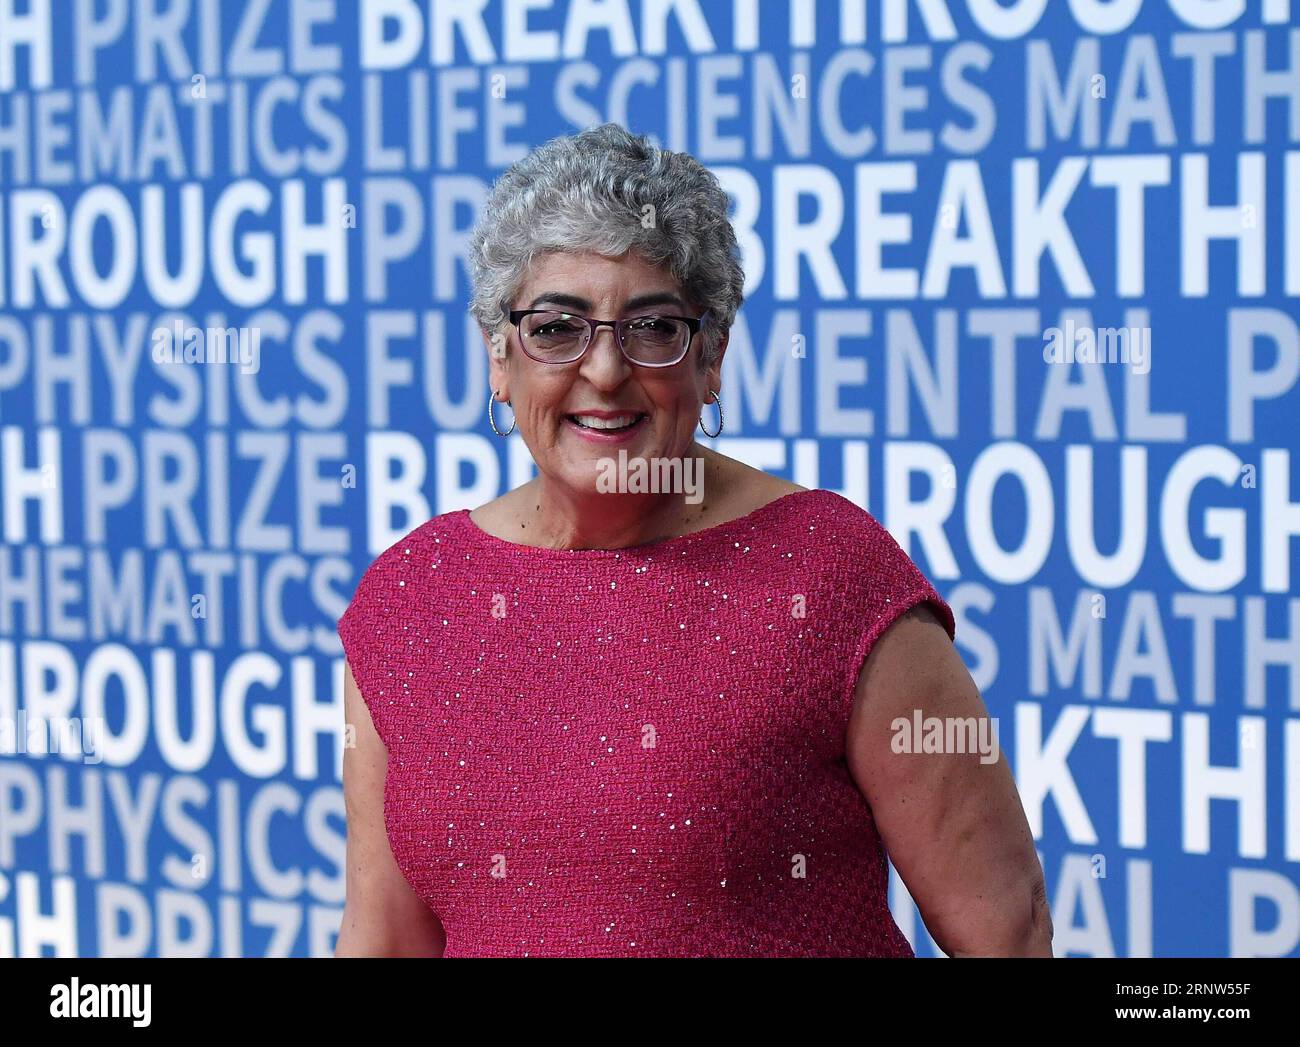 (171204) -- SAN FRANCISCO, Dec. 4, 2017 -- Joanne Chory from the Salk Institute for Biological Studies and Howard Hughes Medical Institute attends the awarding ceremony of the 2018 Breakthrough Prize in San Francisco, the United States, on Dec. 3, 2017. The Breakthrough Prize Foundation on Sunday announced here the winners of the 2018 Breakthrough Prizes in fundamental physics, life sciences and mathematics, together with several other prizes to encourage young scientists. The prize in life sciences went to Joanne Chory from the Salk Institute for Biological Studies and Howard Hughes Medical I Stock Photo